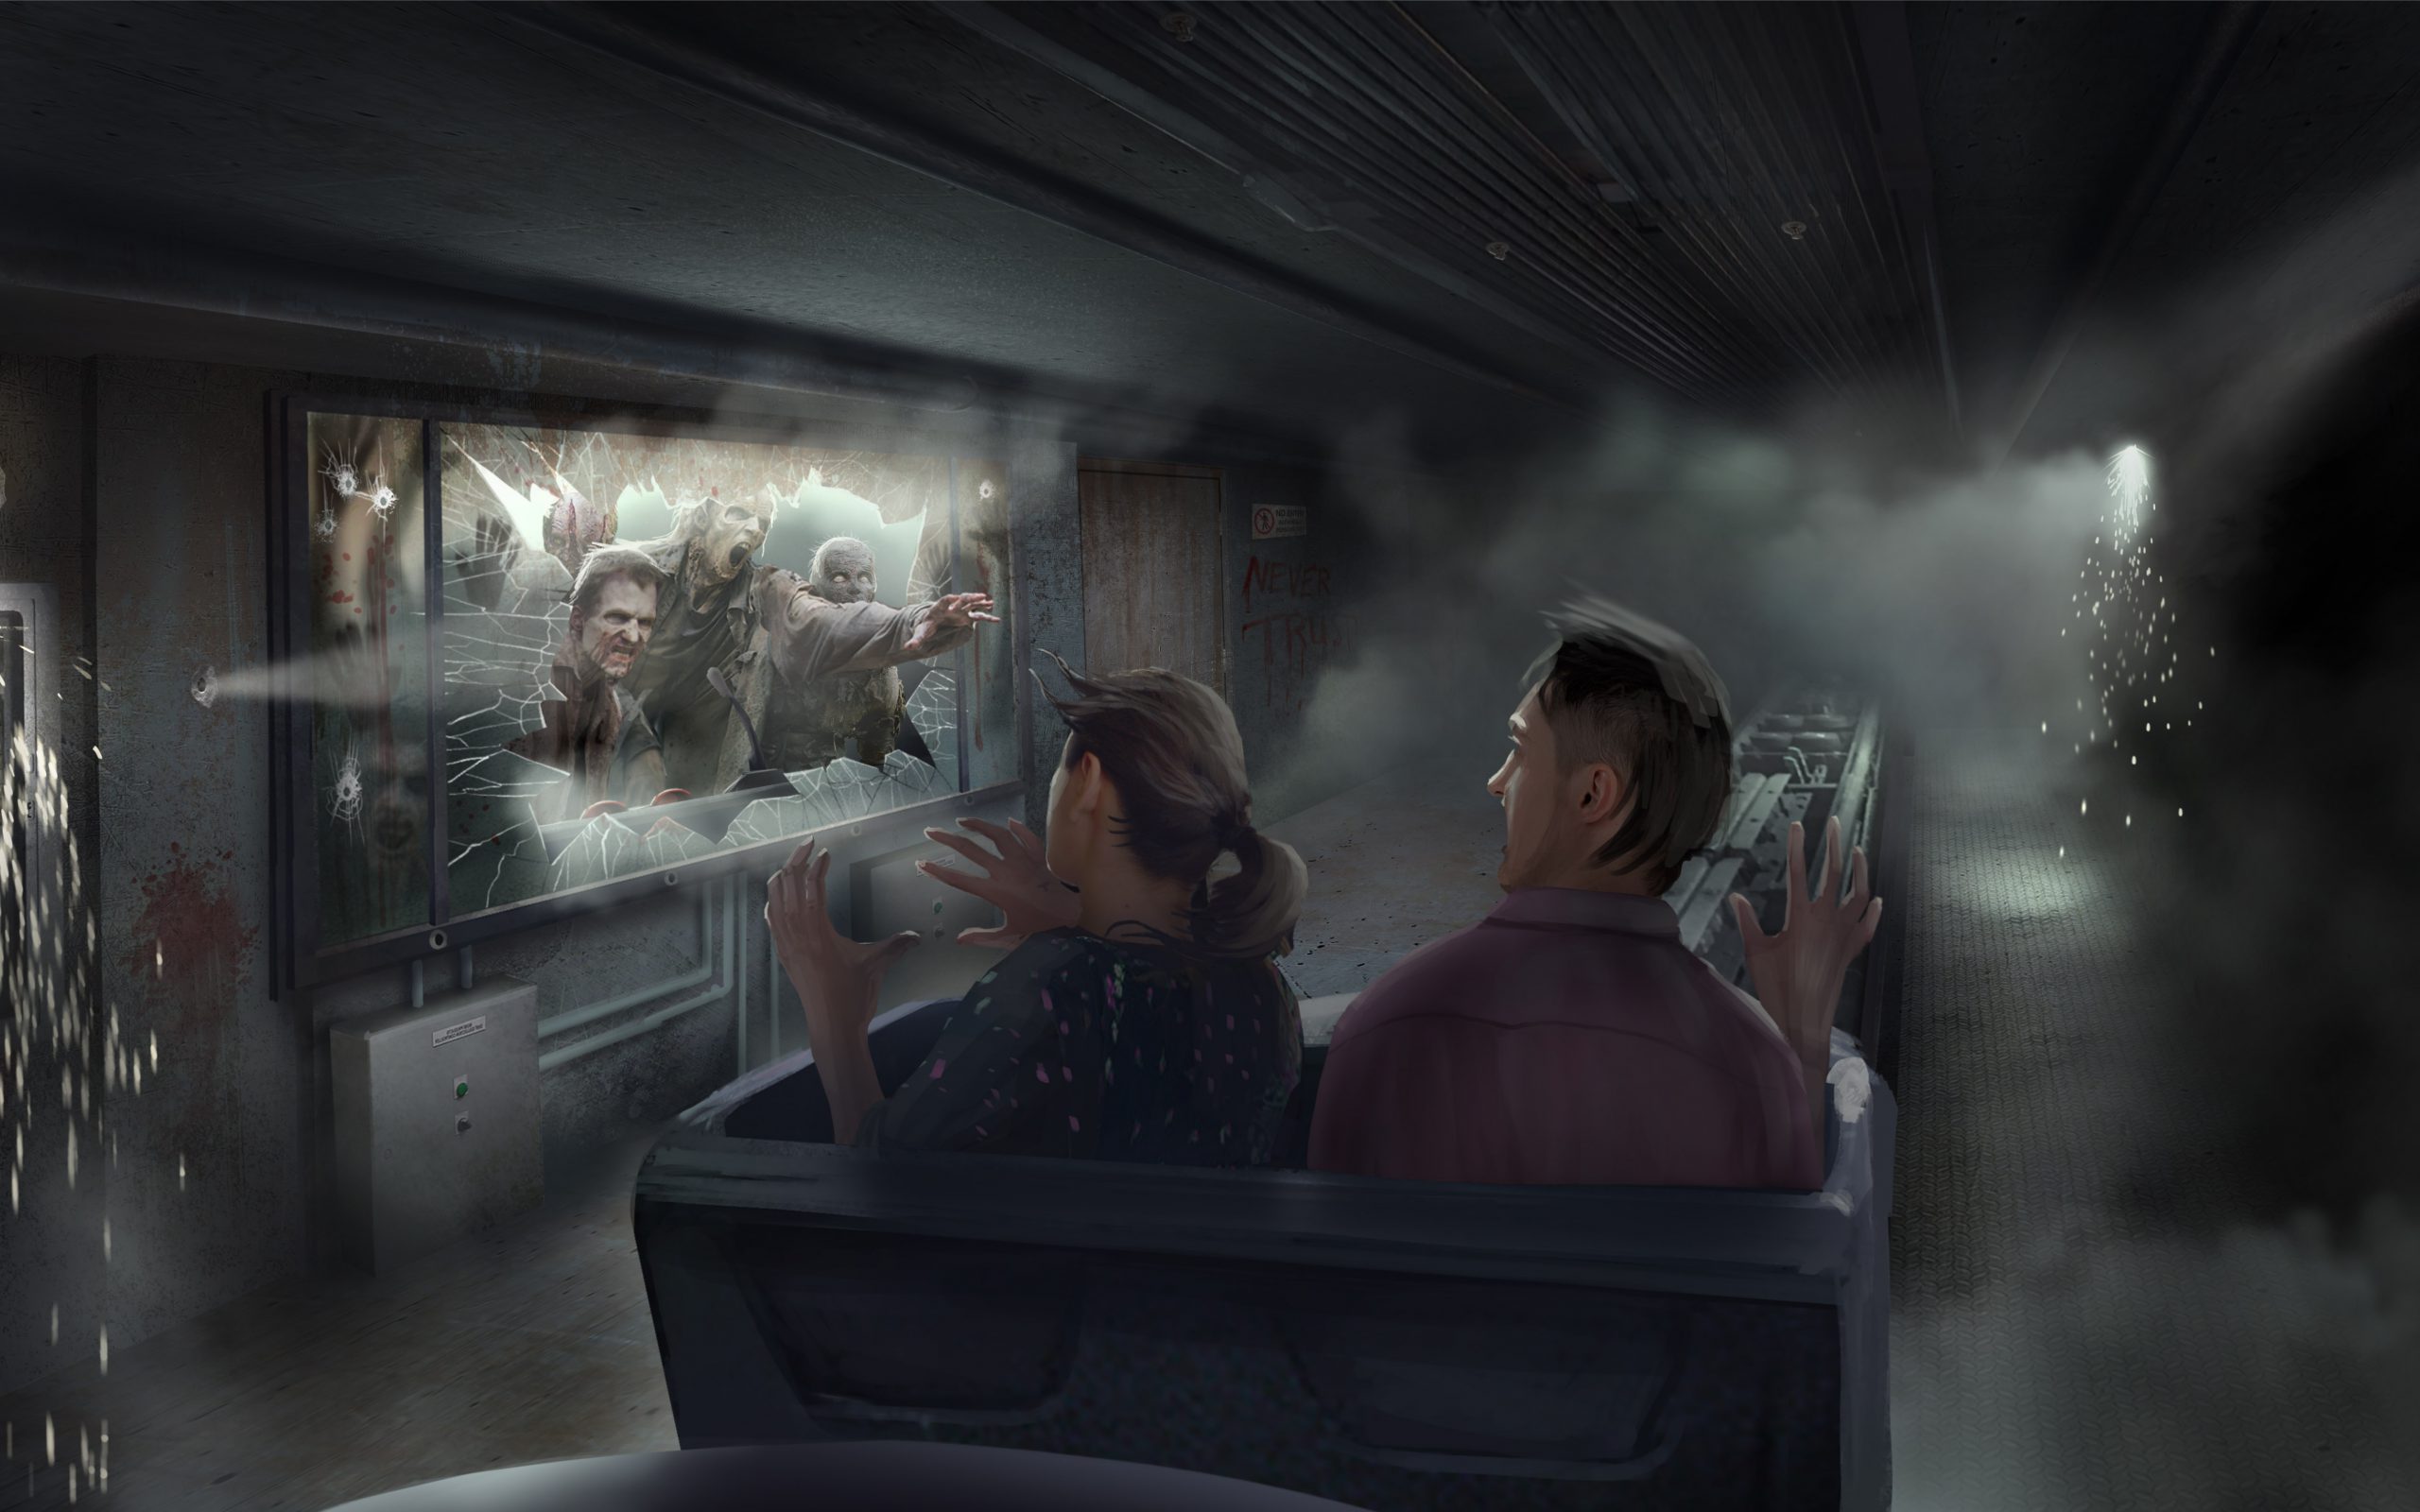 Concept image for The Walking Dead the Ride